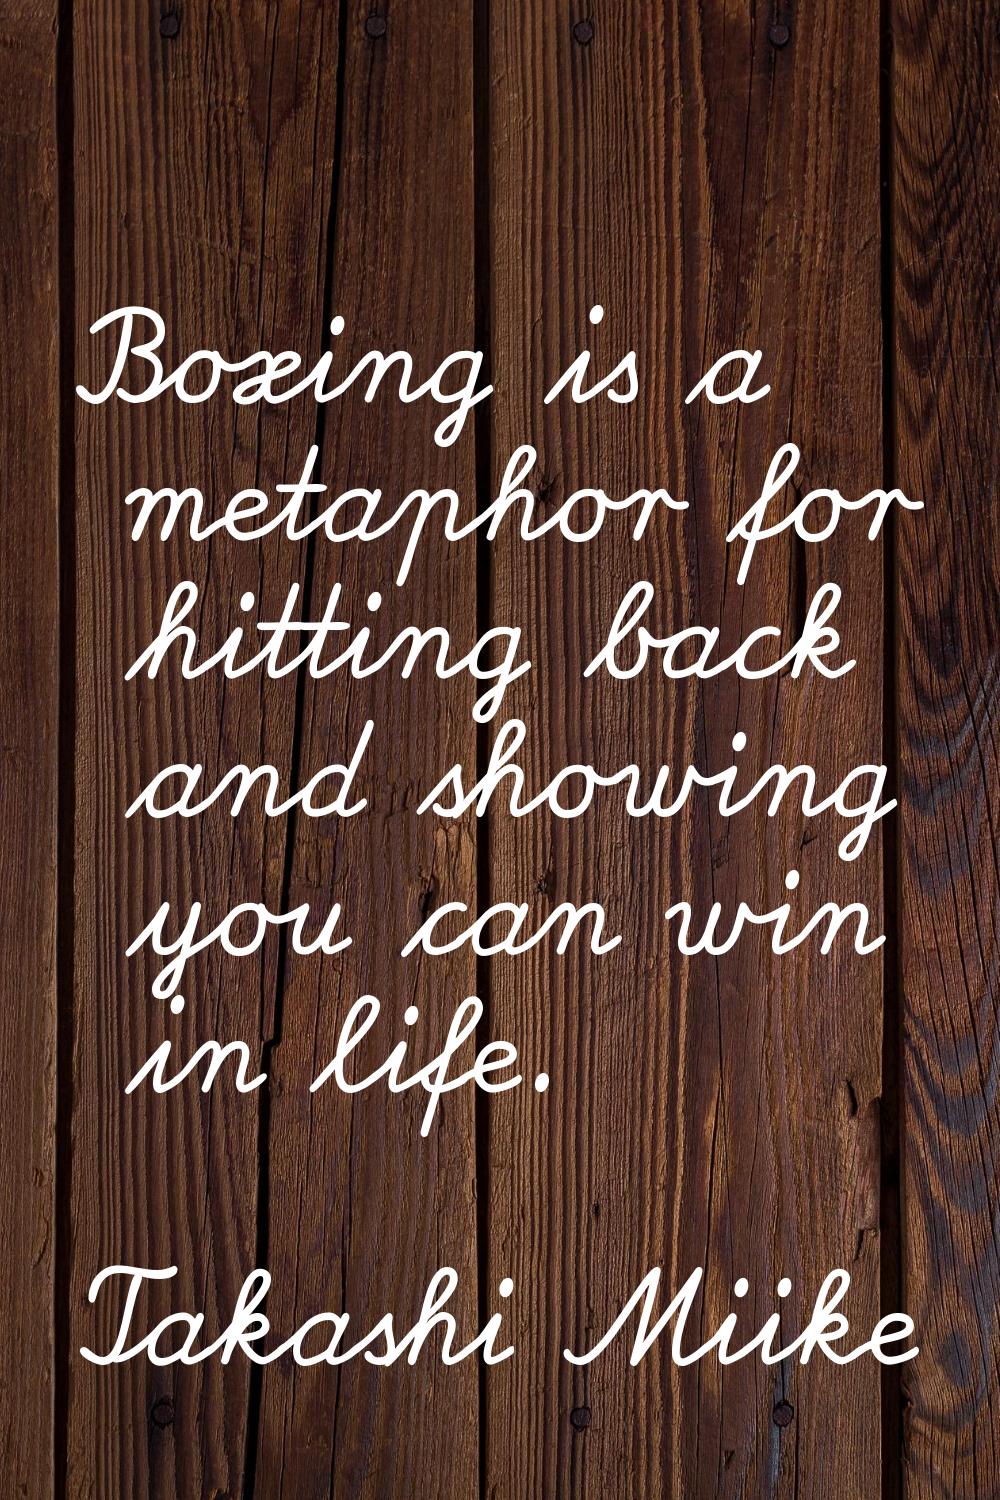 Boxing is a metaphor for hitting back and showing you can win in life.